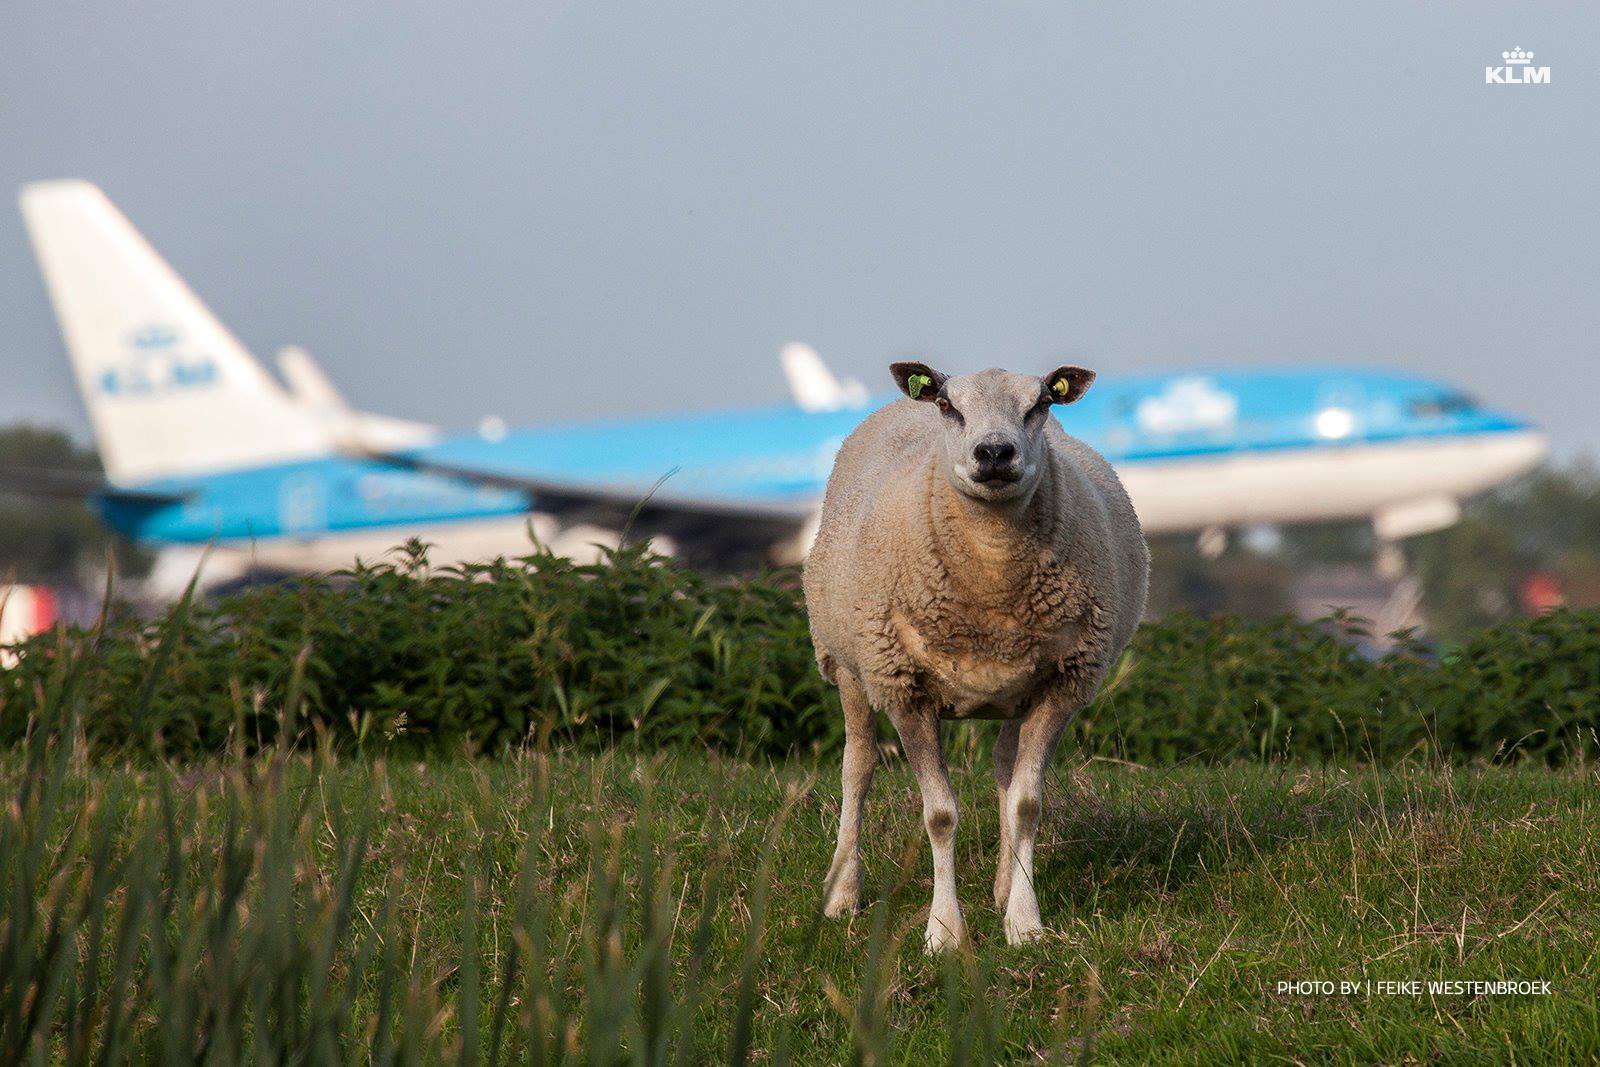 A sheep in the airfield meadow amidst a KLM flight takeoff.